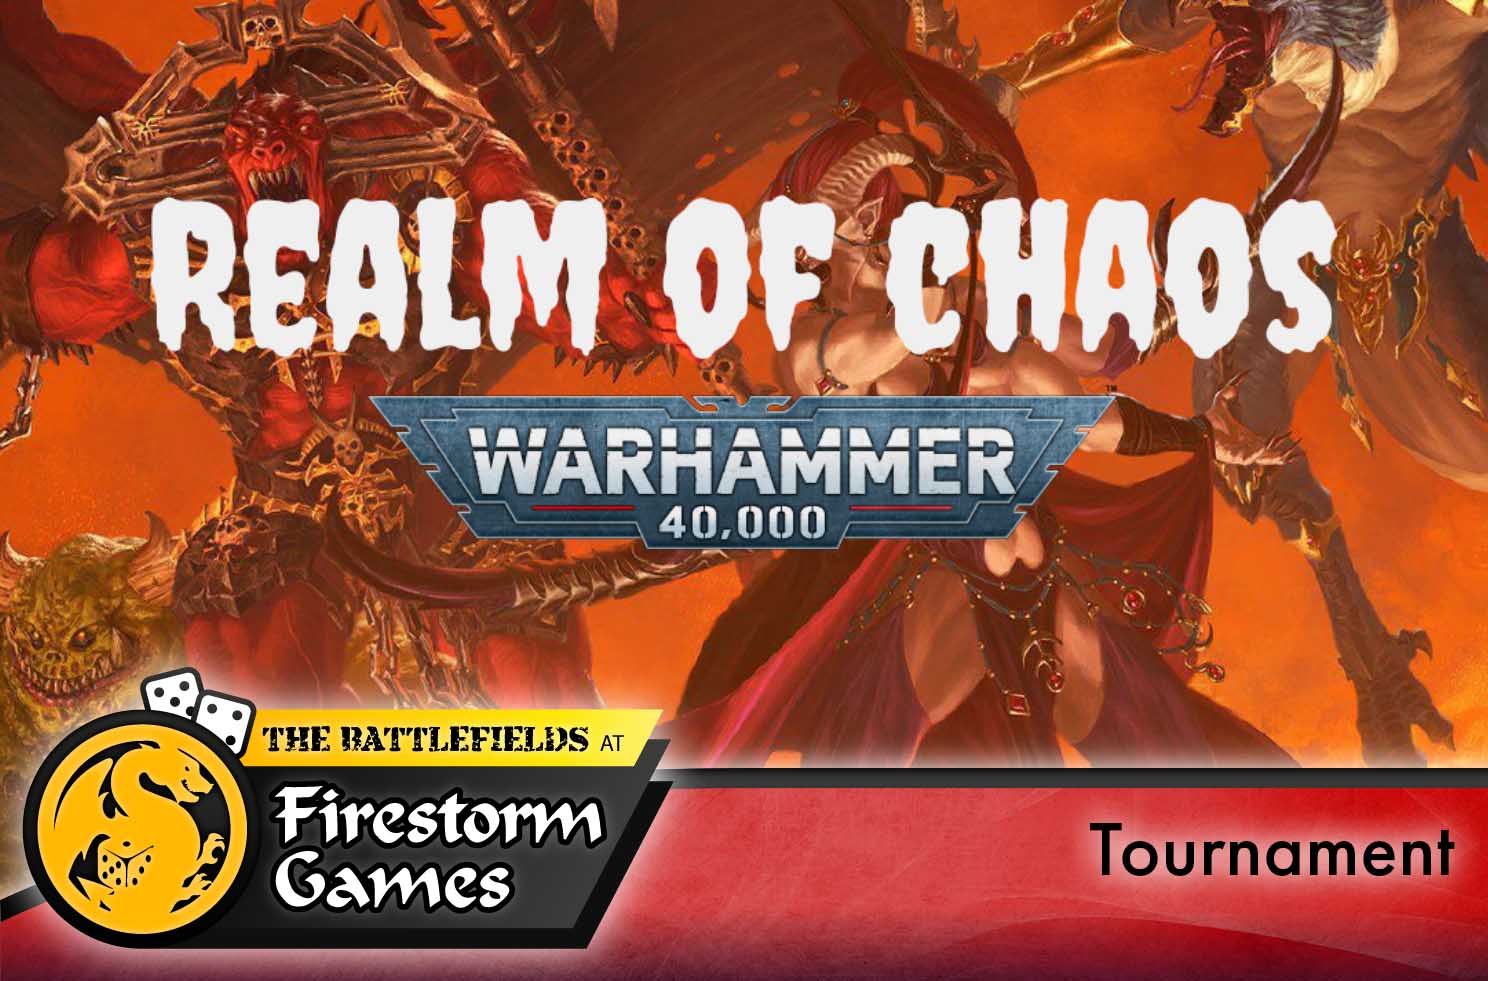 Warhammer 40,000: Realm of Chaos